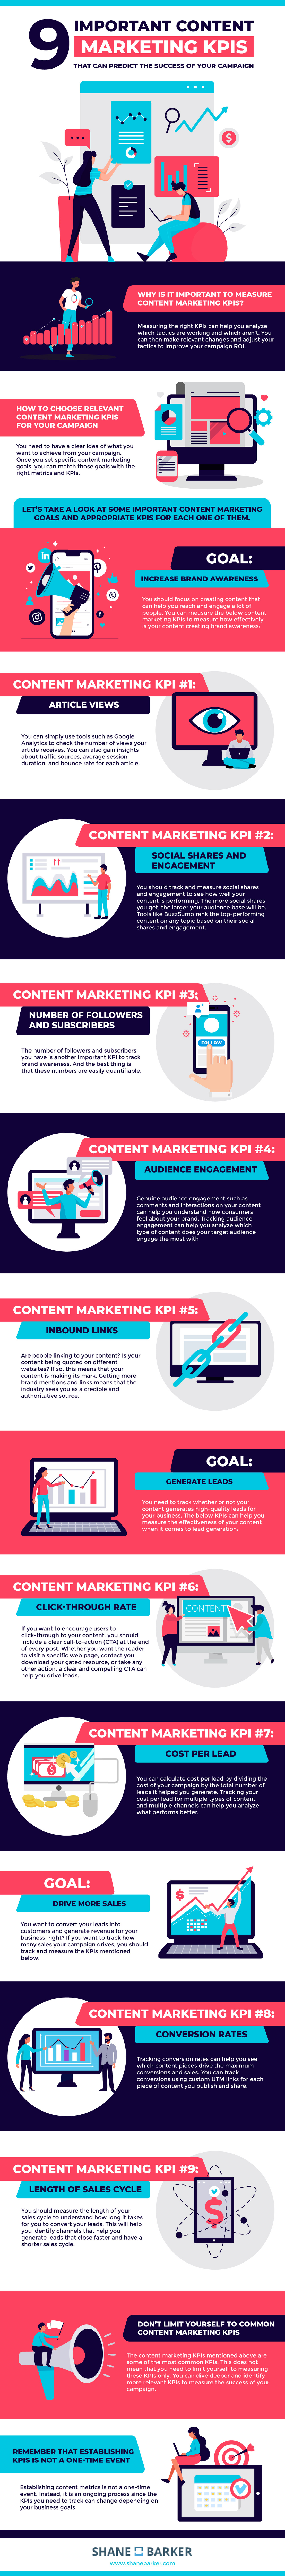 Infographic on Important Content Marketing KPIs
